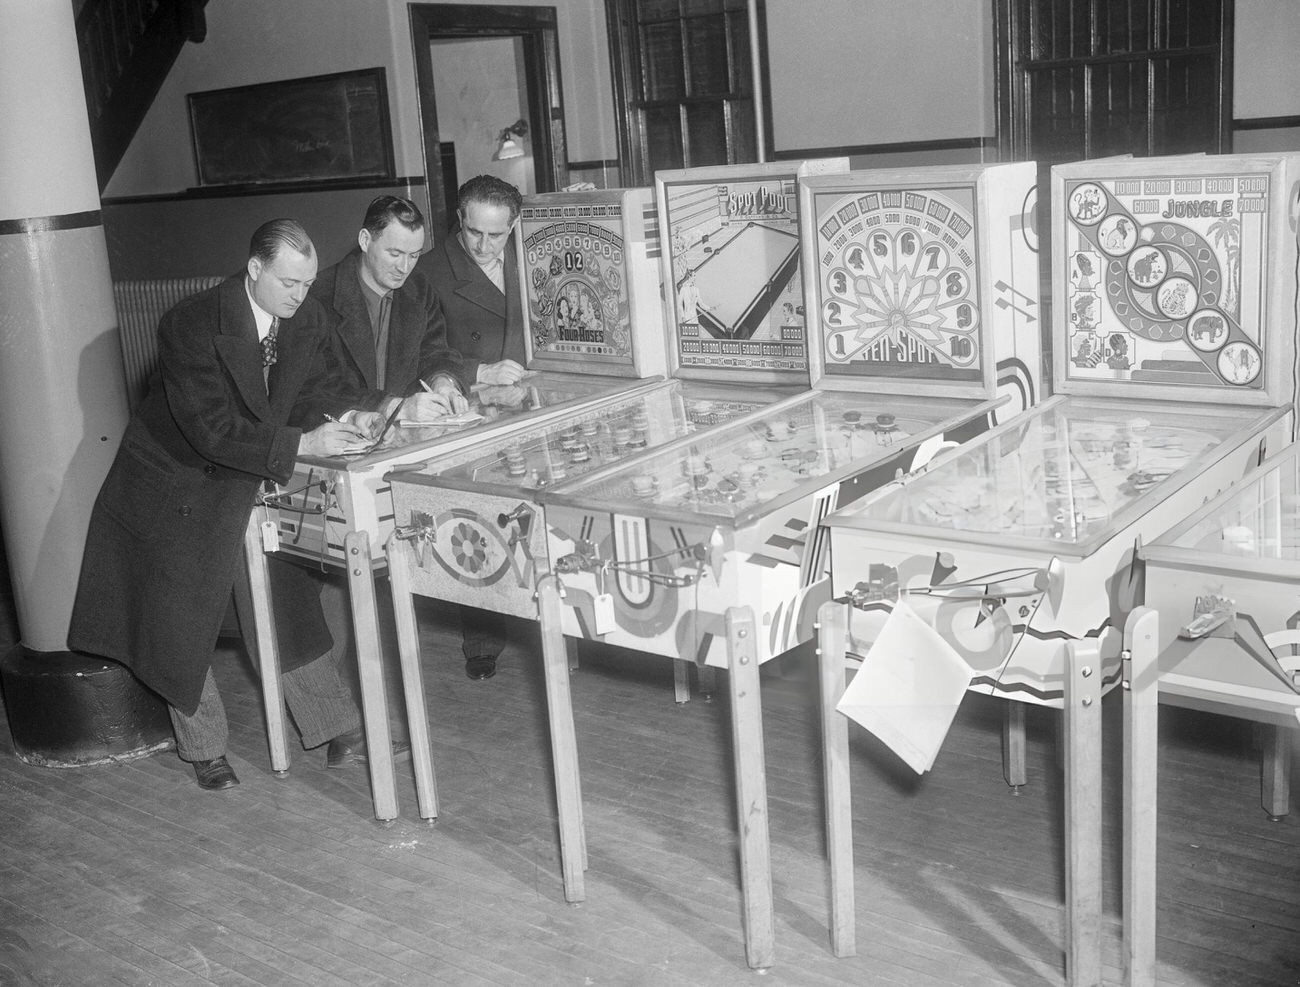 Police Commissioner Valentine Orders Seizure Of Pinball Machines In New York As Gambling Devices.